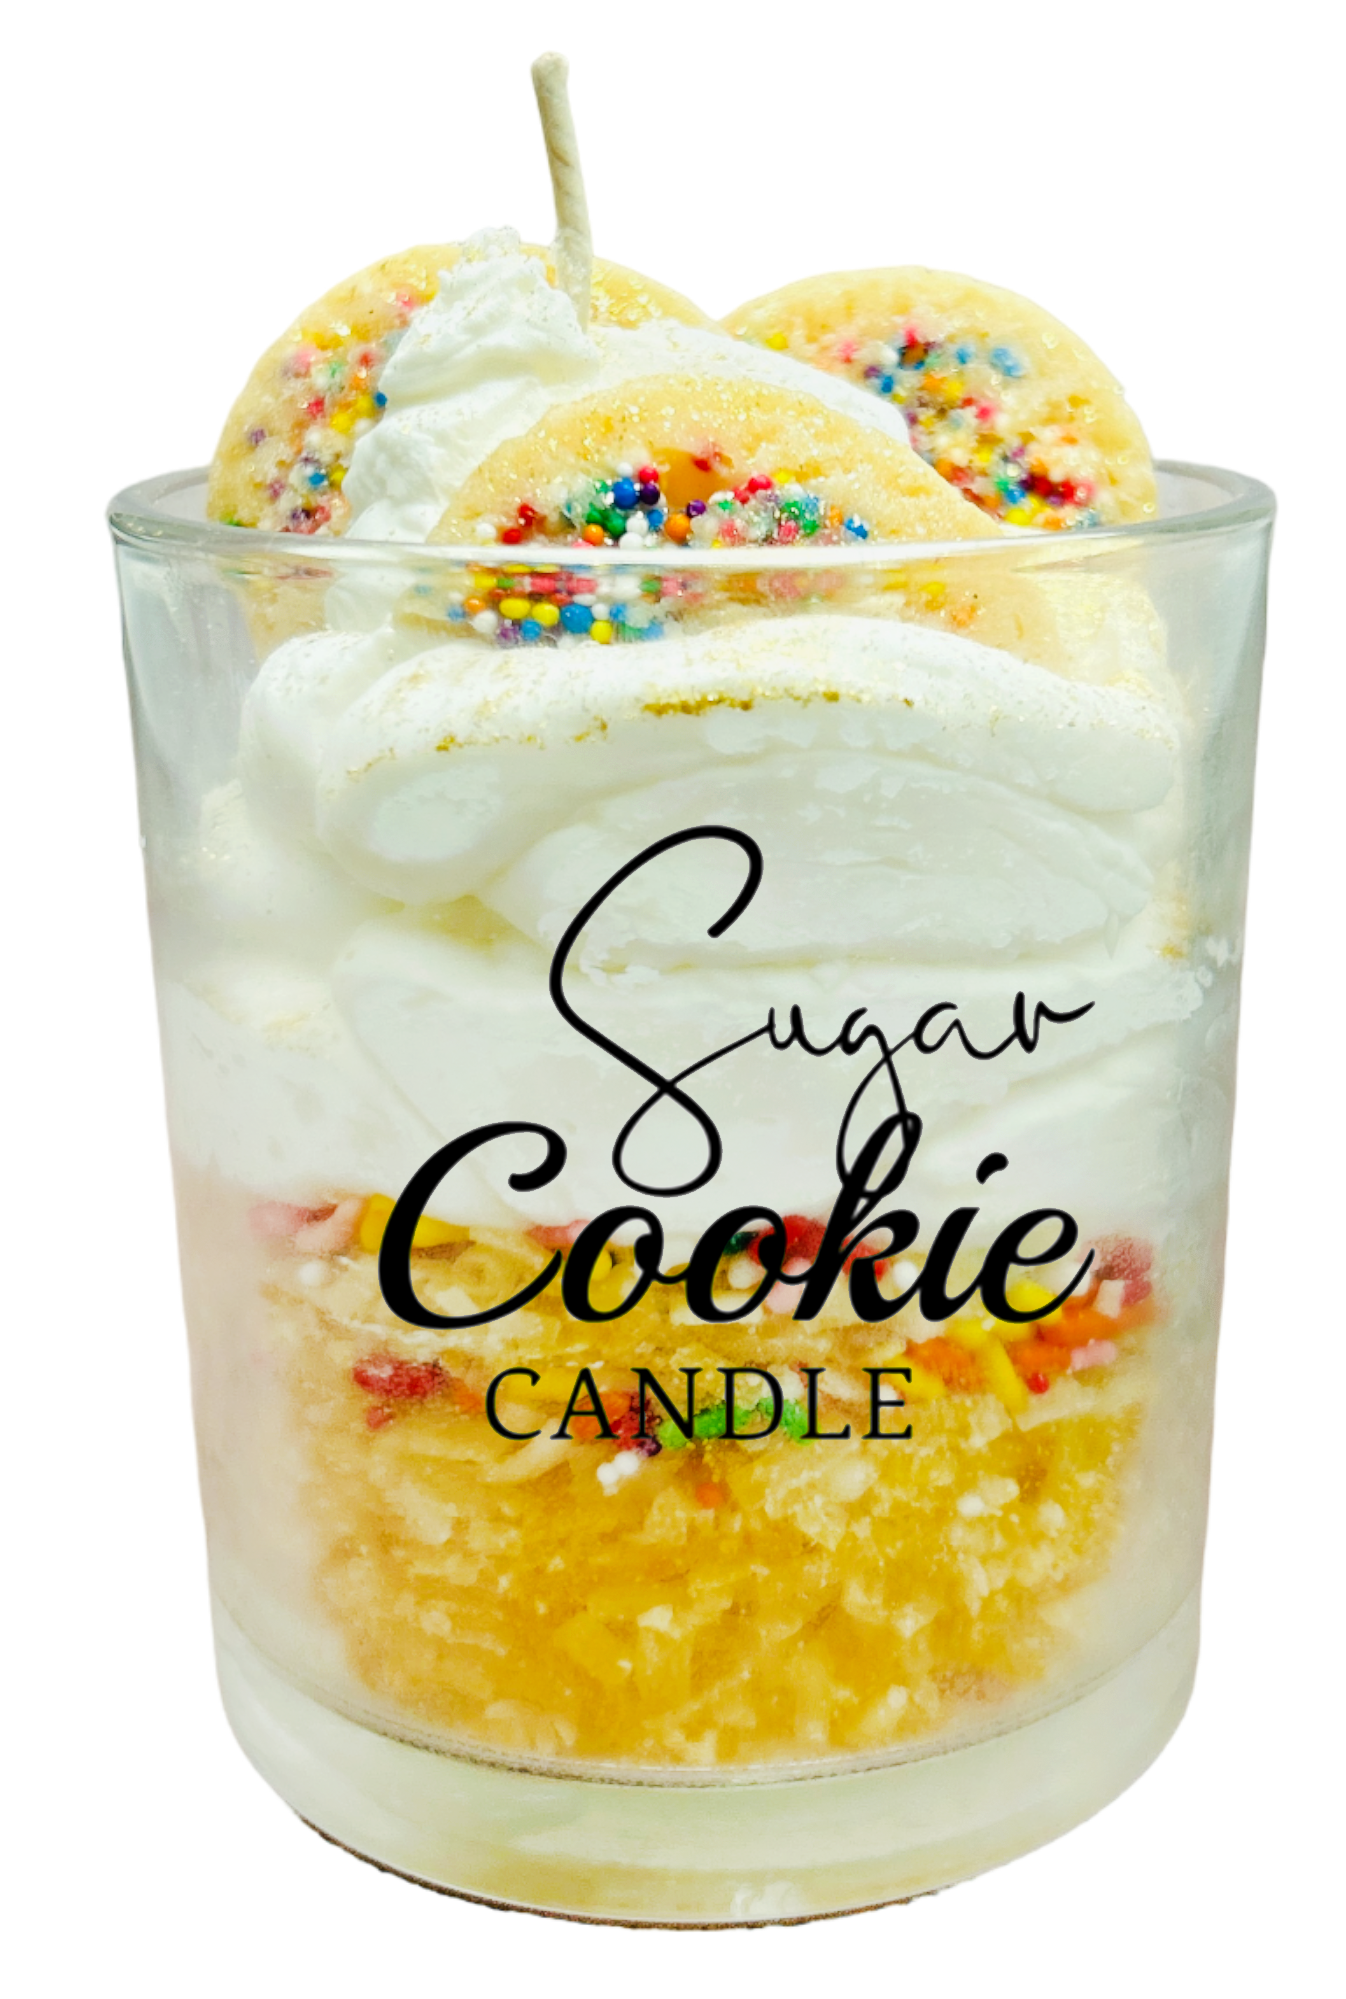 The Sugar Cookie Candle™